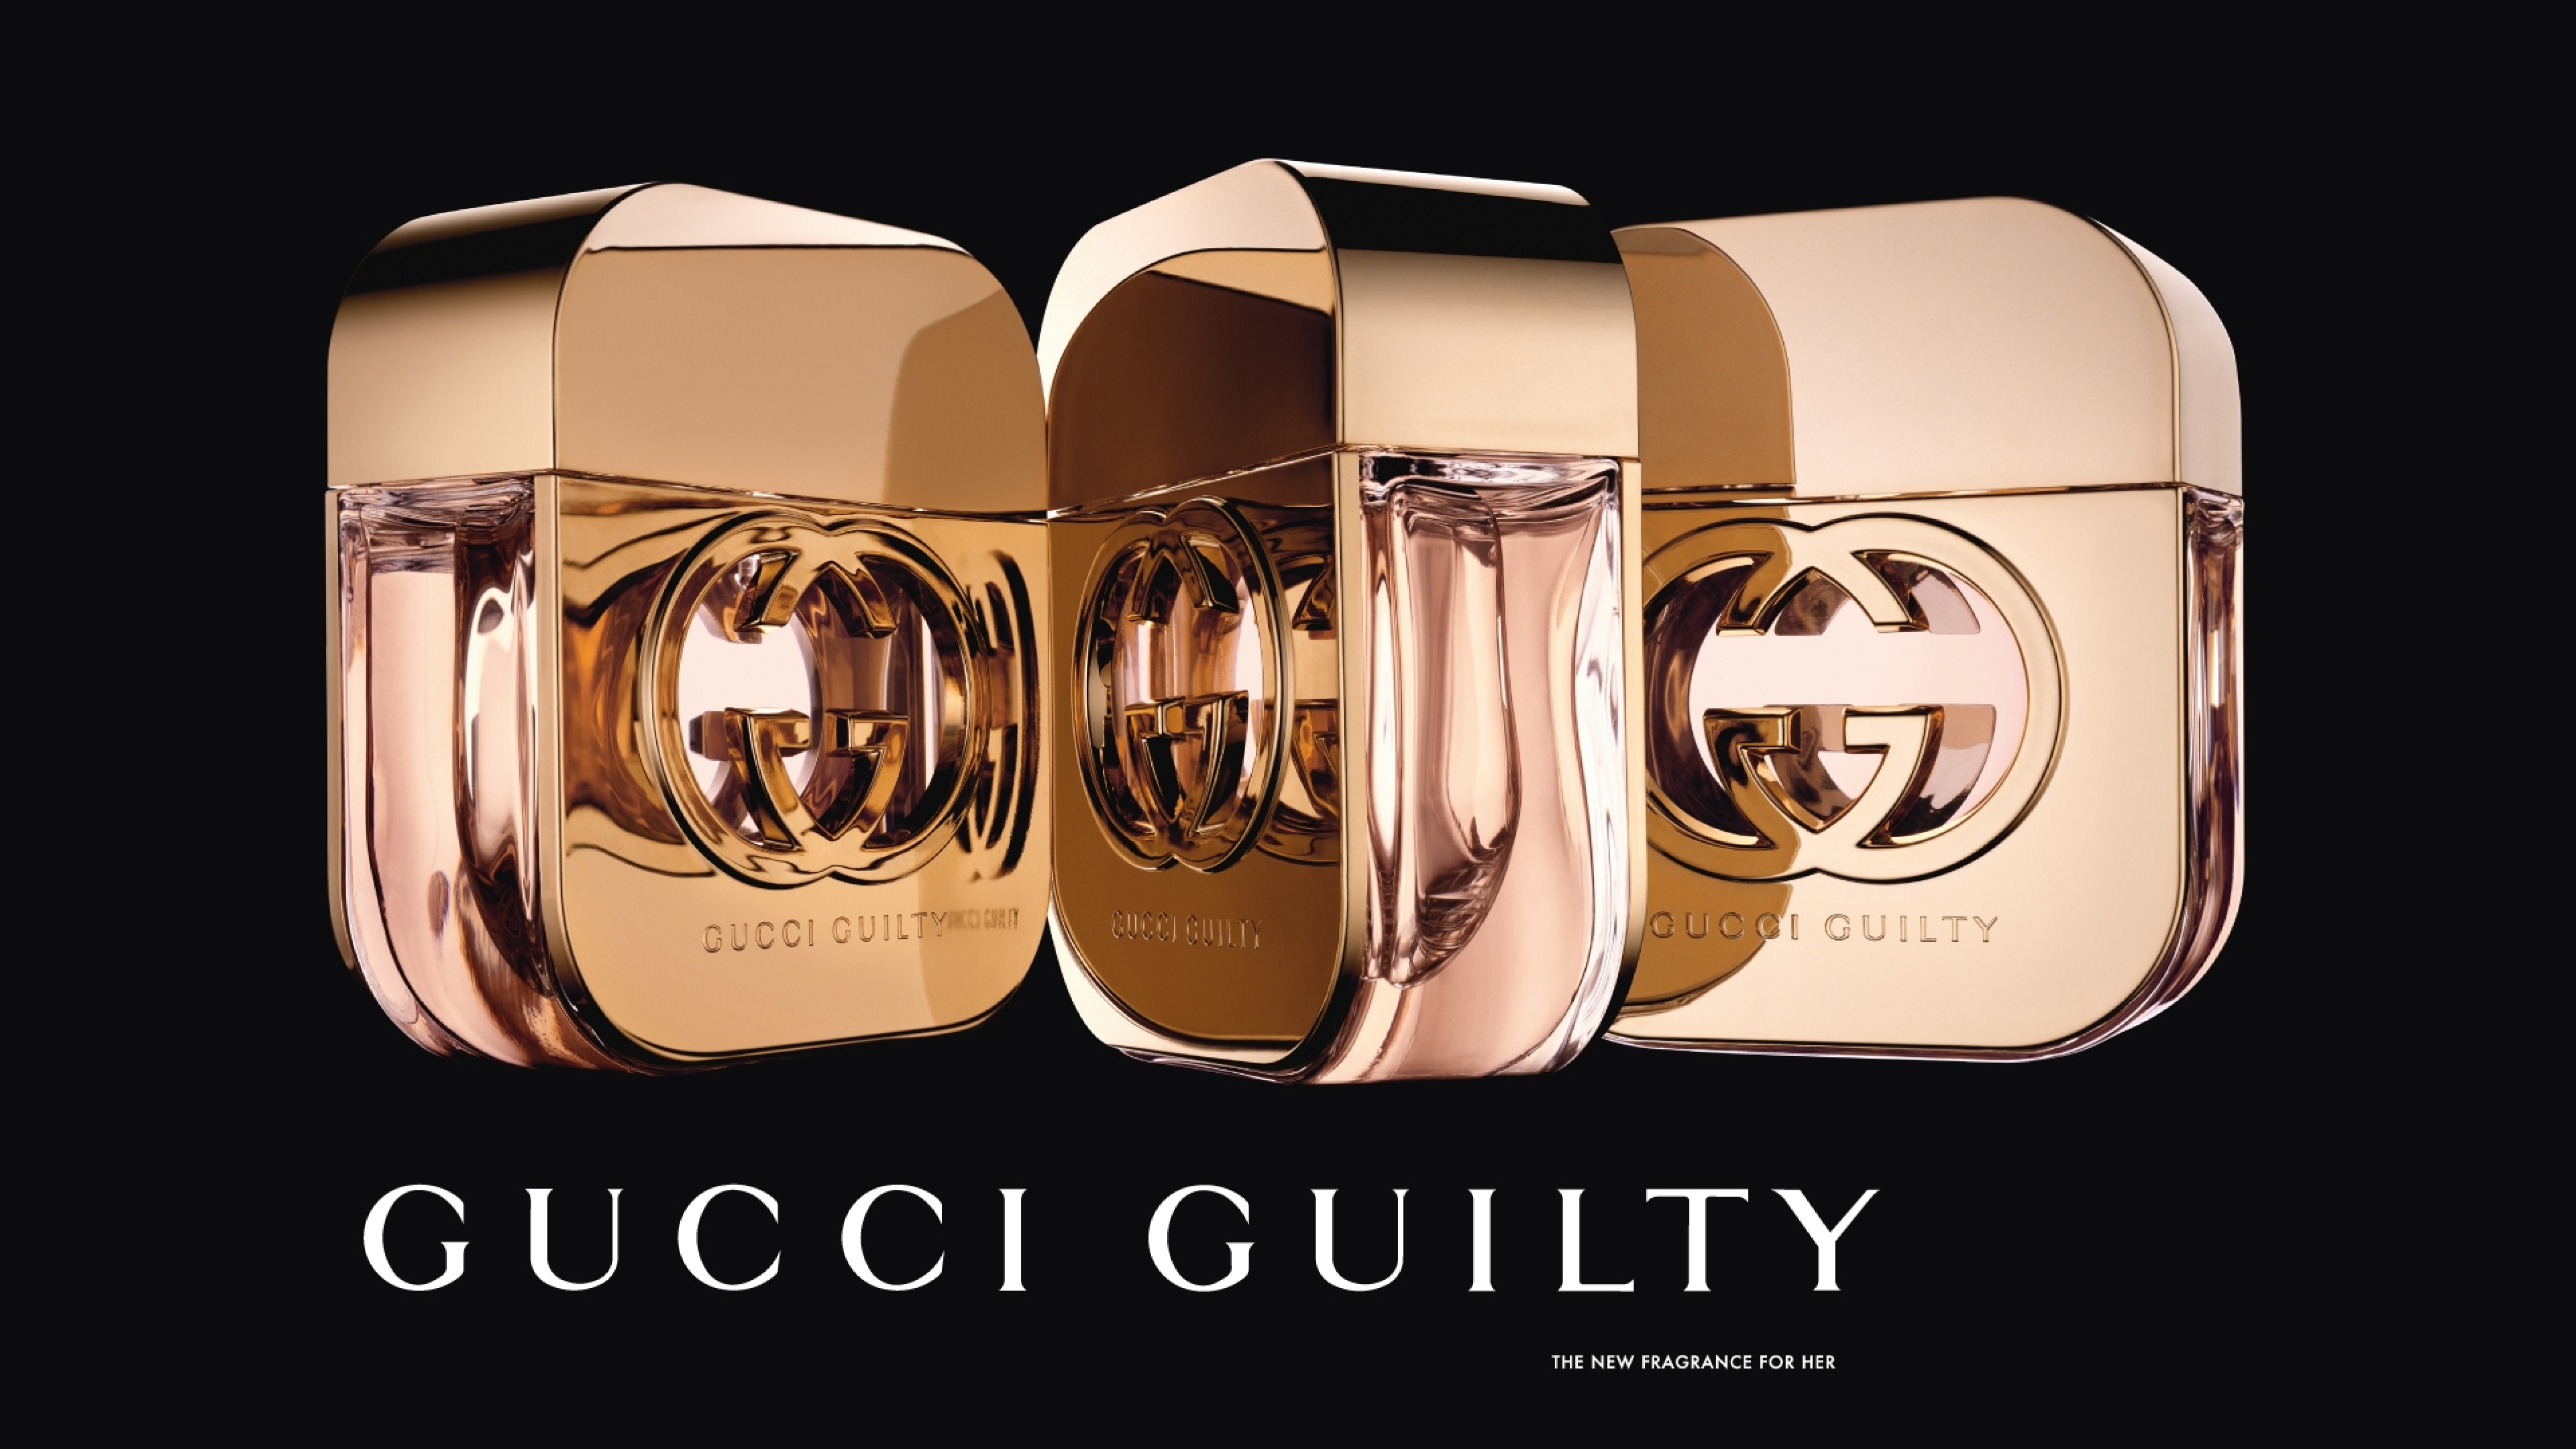 51x Gucci Guilty Perfume 5k Wallpaper Hd Brands 4k Wallpapers Images Photos And Background